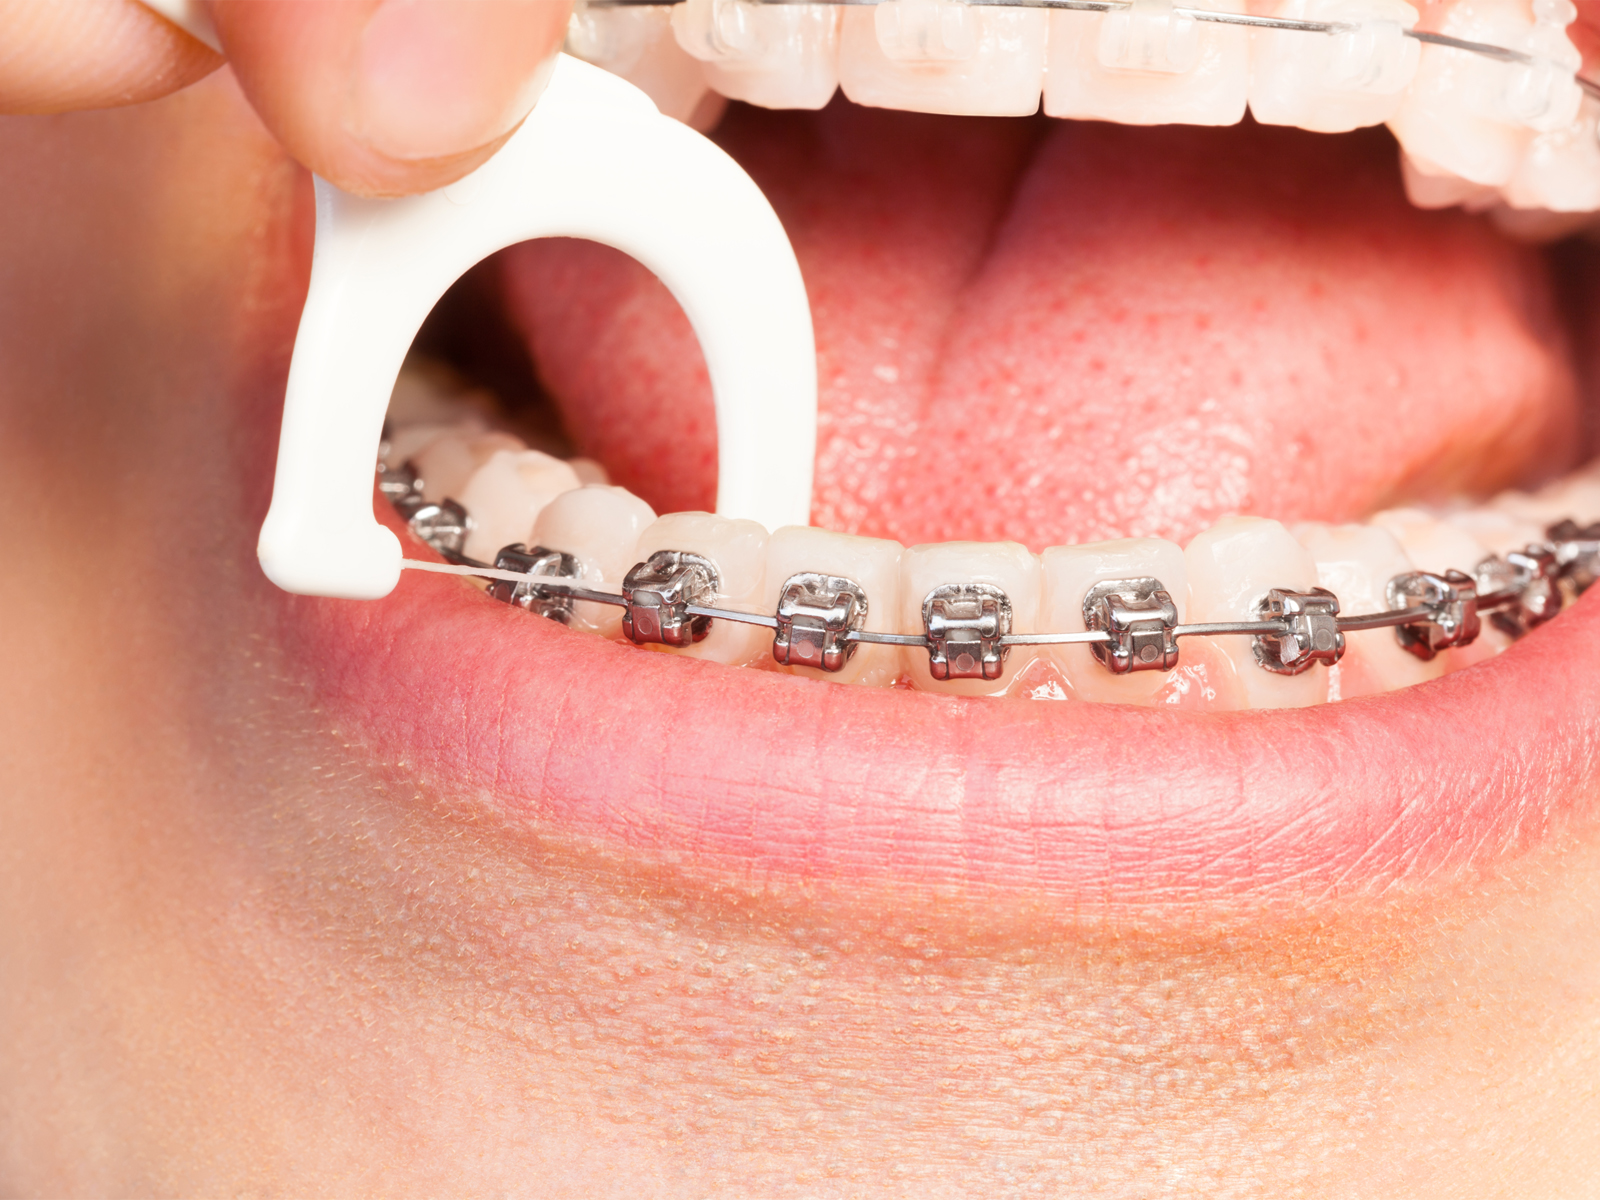 Can You Get Your Teeth Cleaned While Wearing Braces?